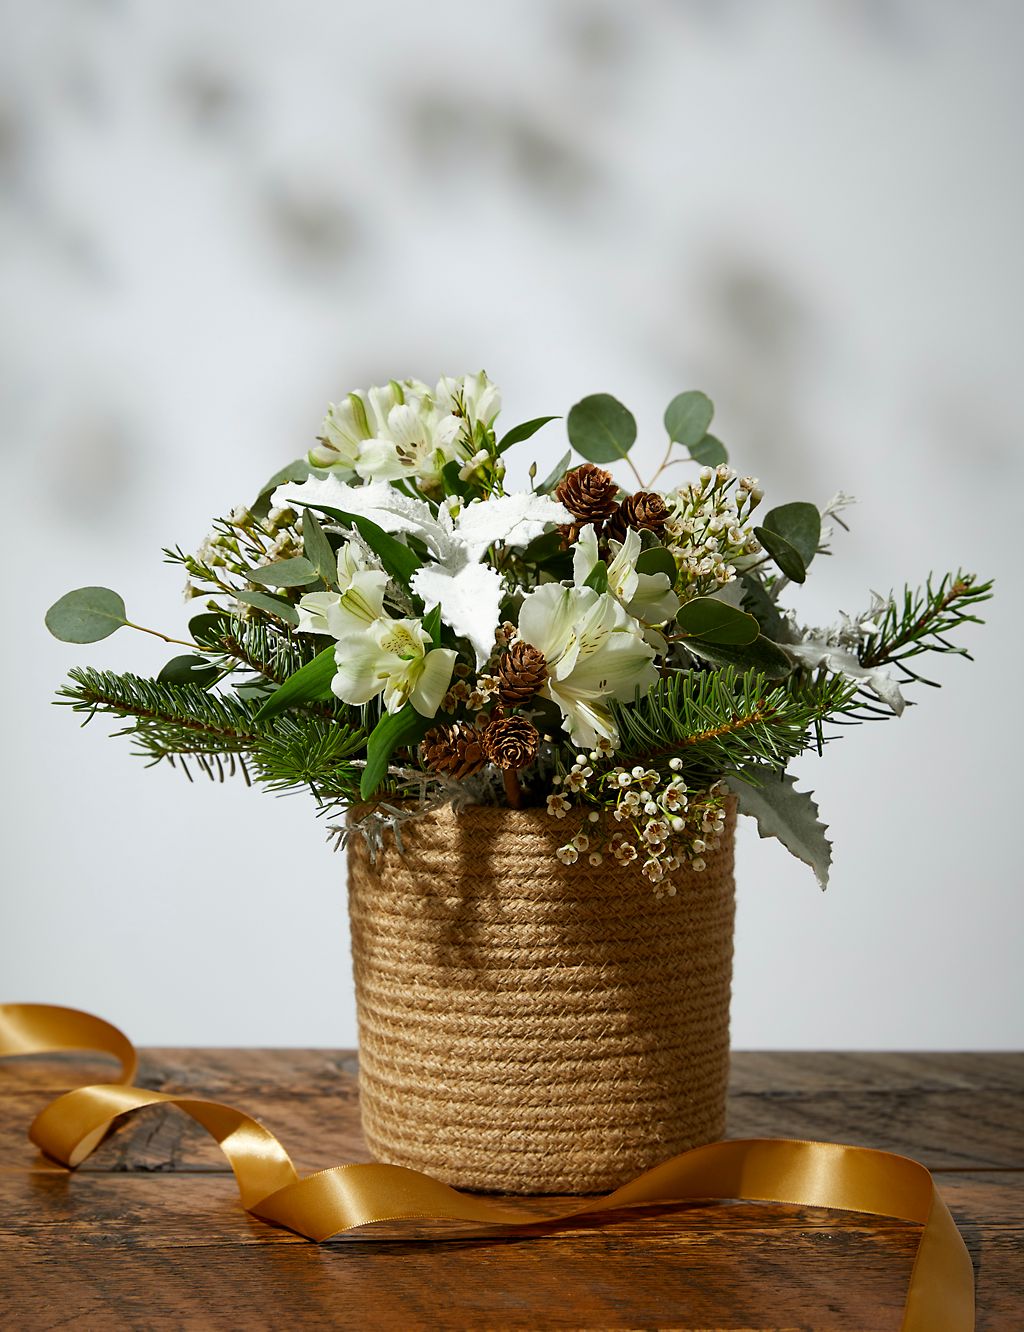 Create Your Own Christmas Table Arrangement 2 of 7